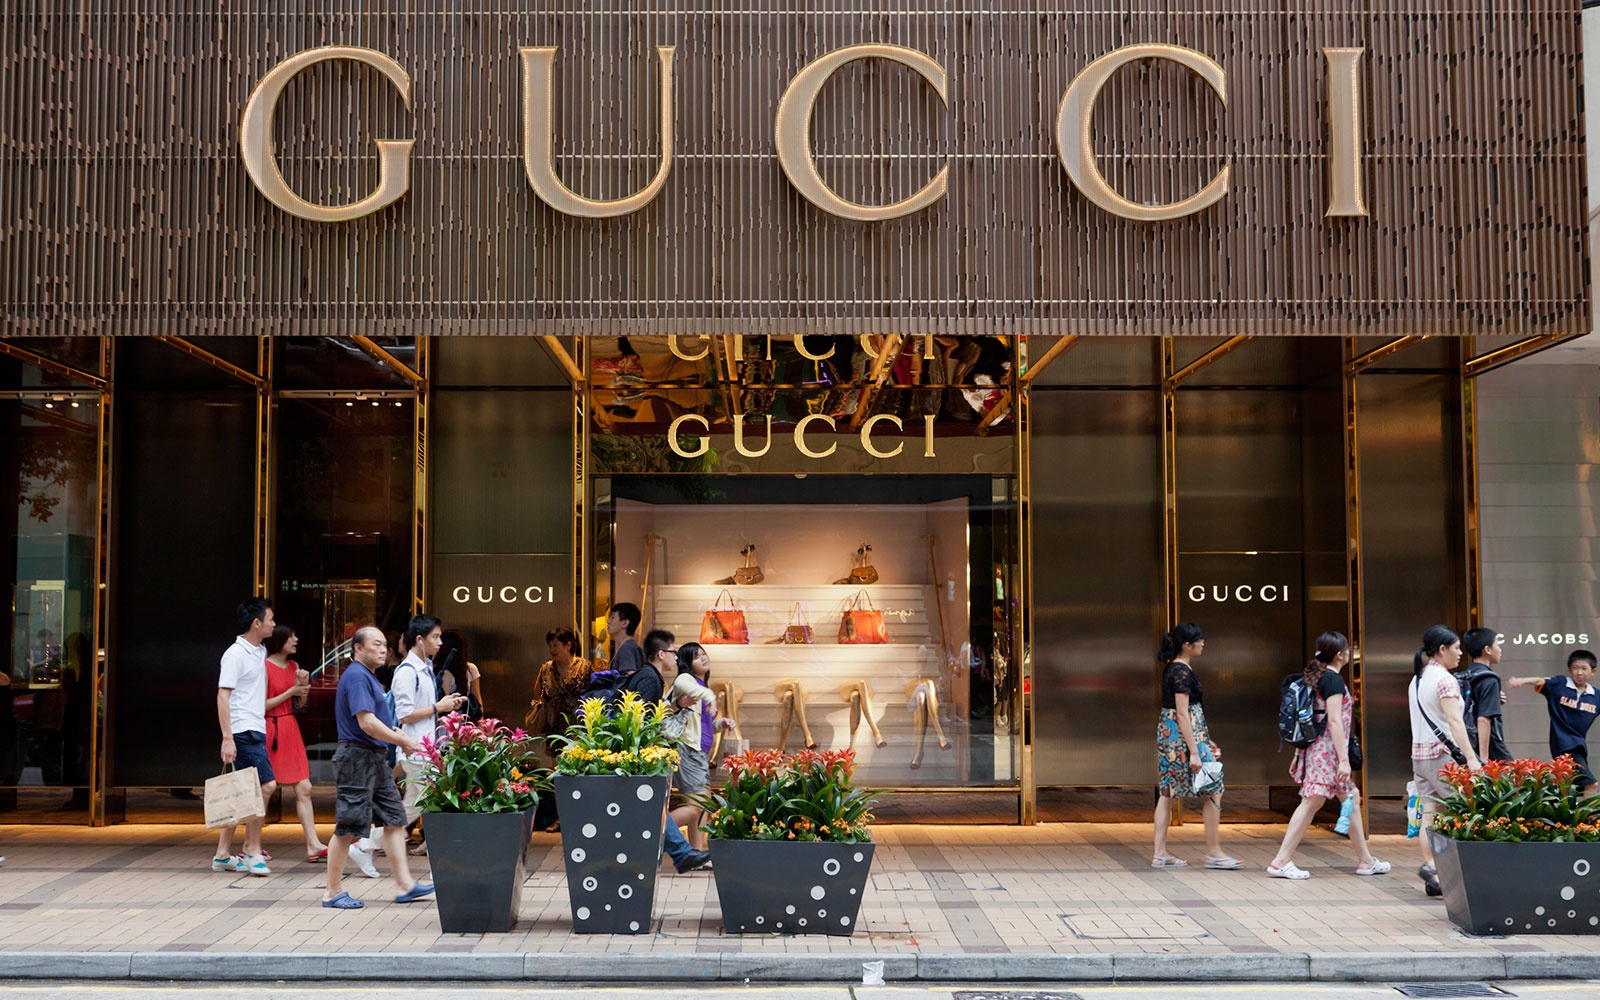 Gucci Now Has Its Own Restaurant